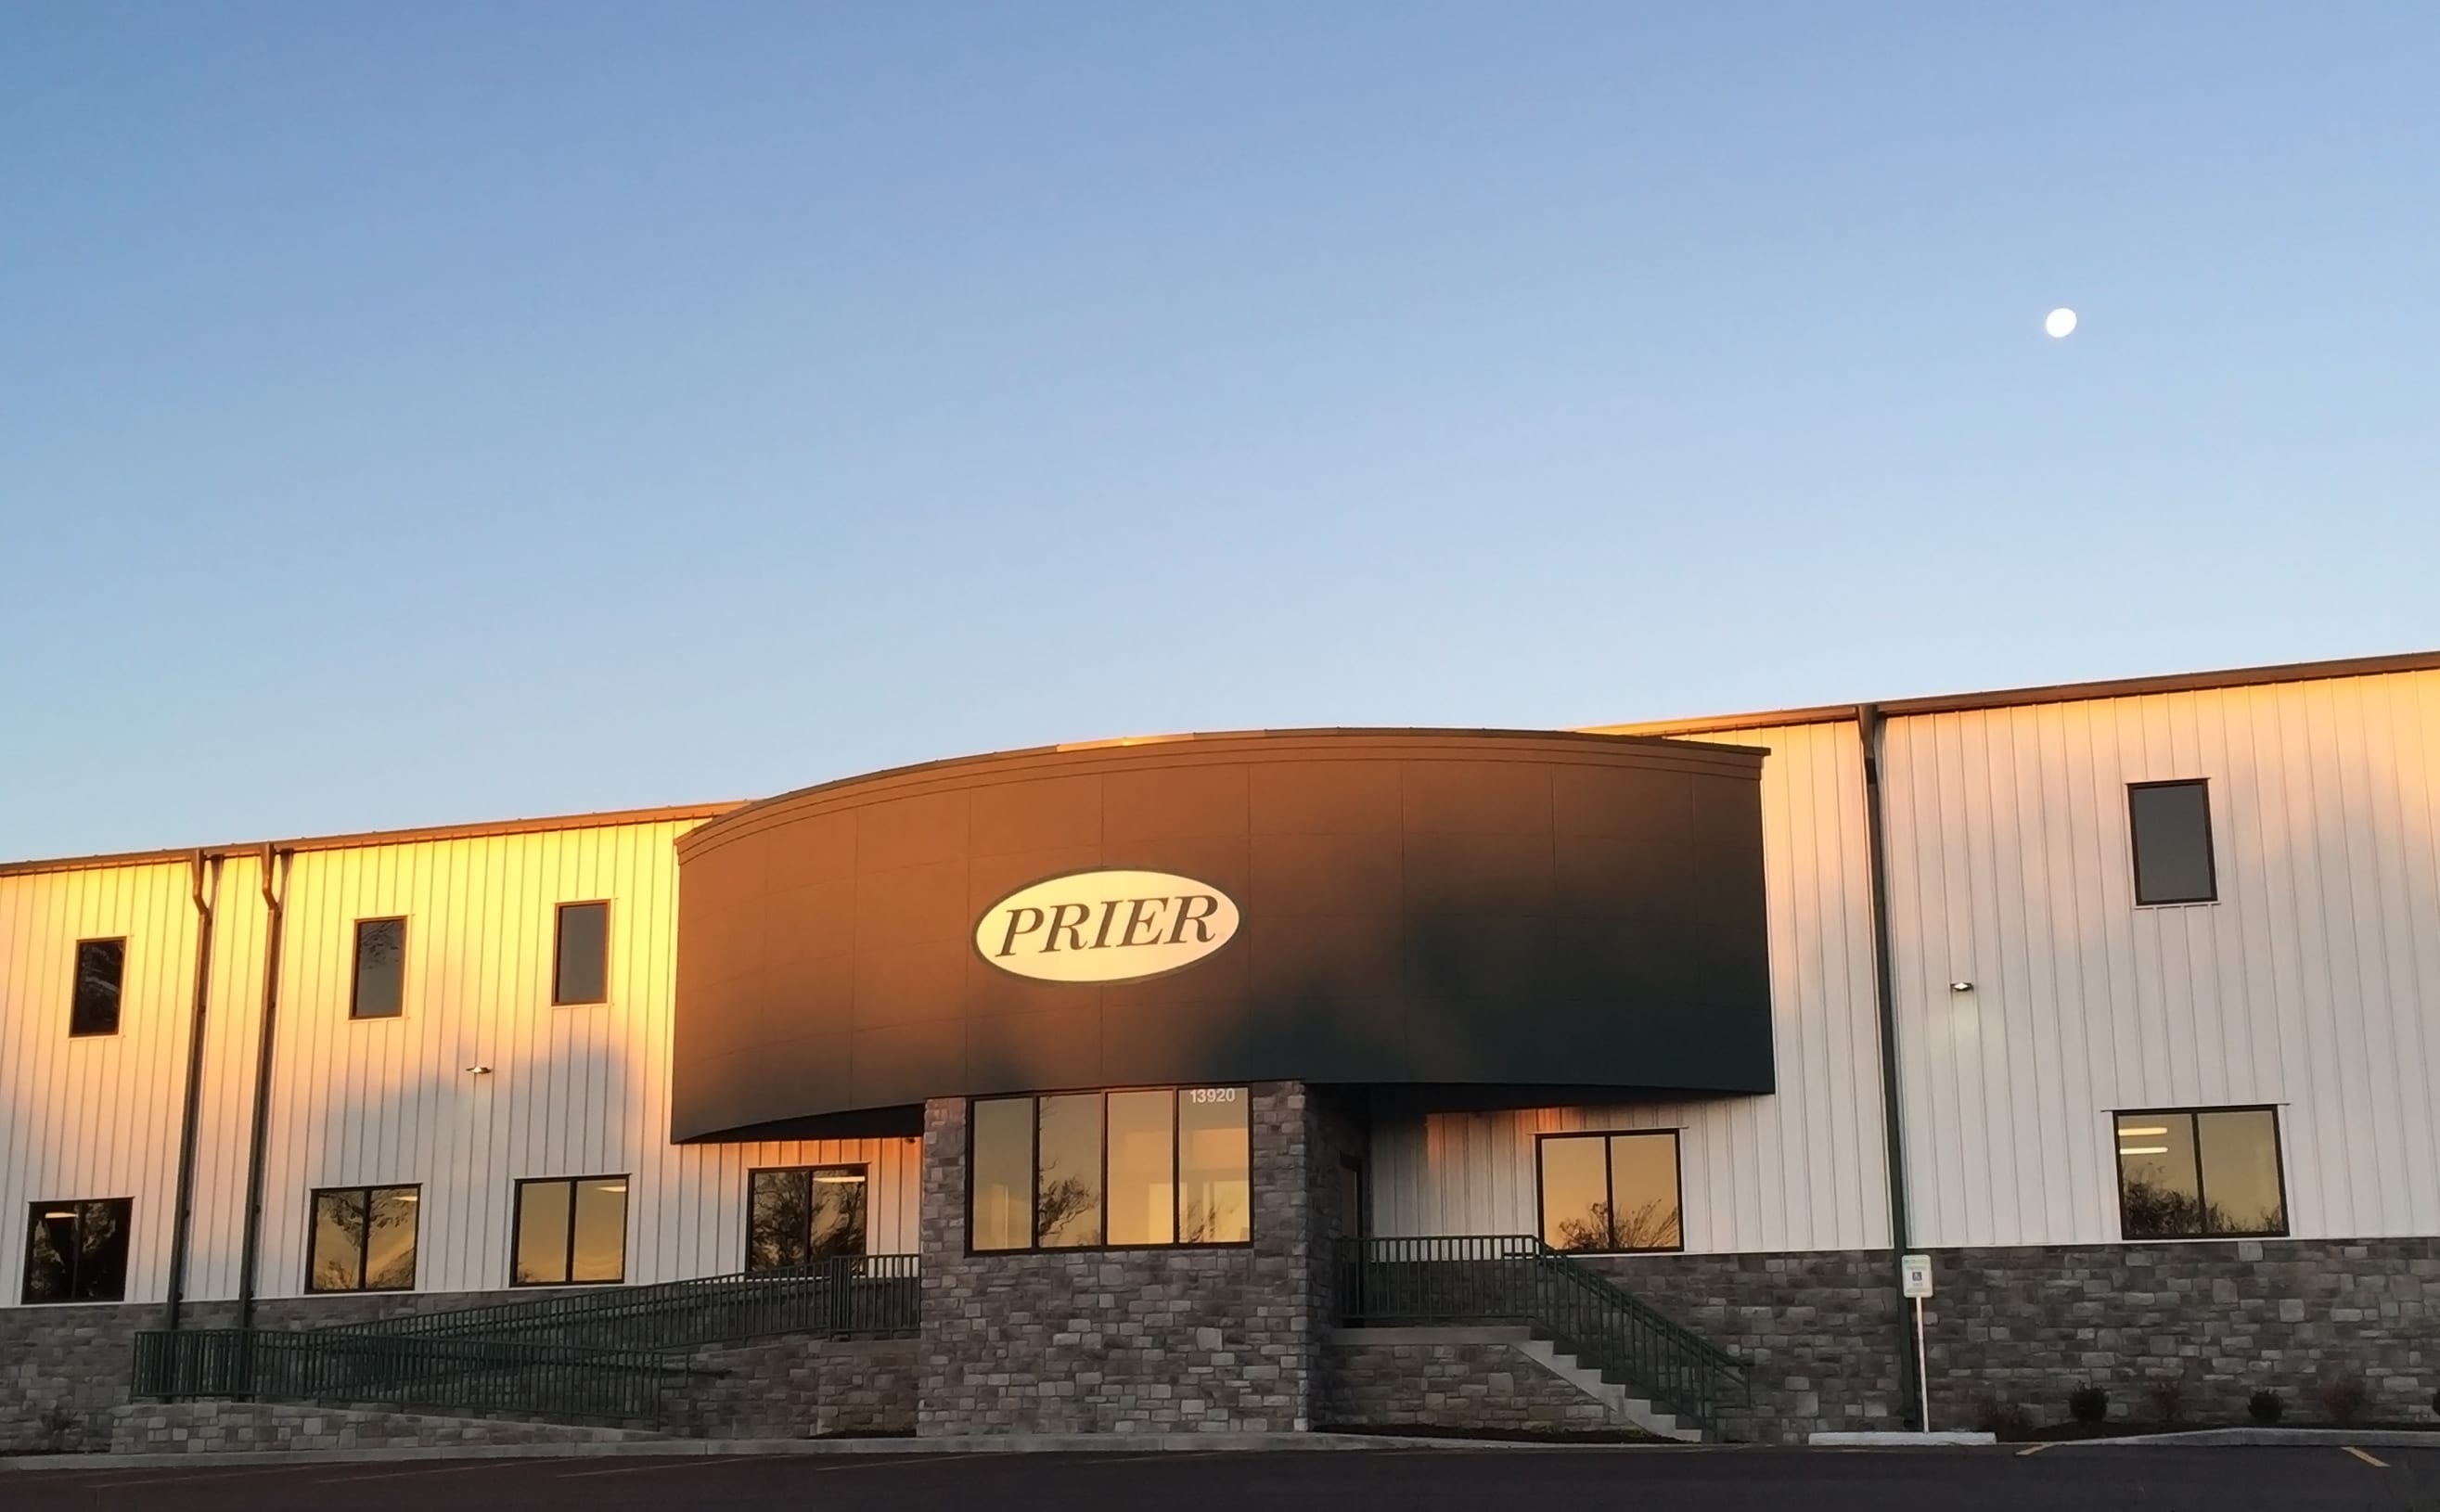 PRIER Announces Completion of Sales, Training and Logistics Center